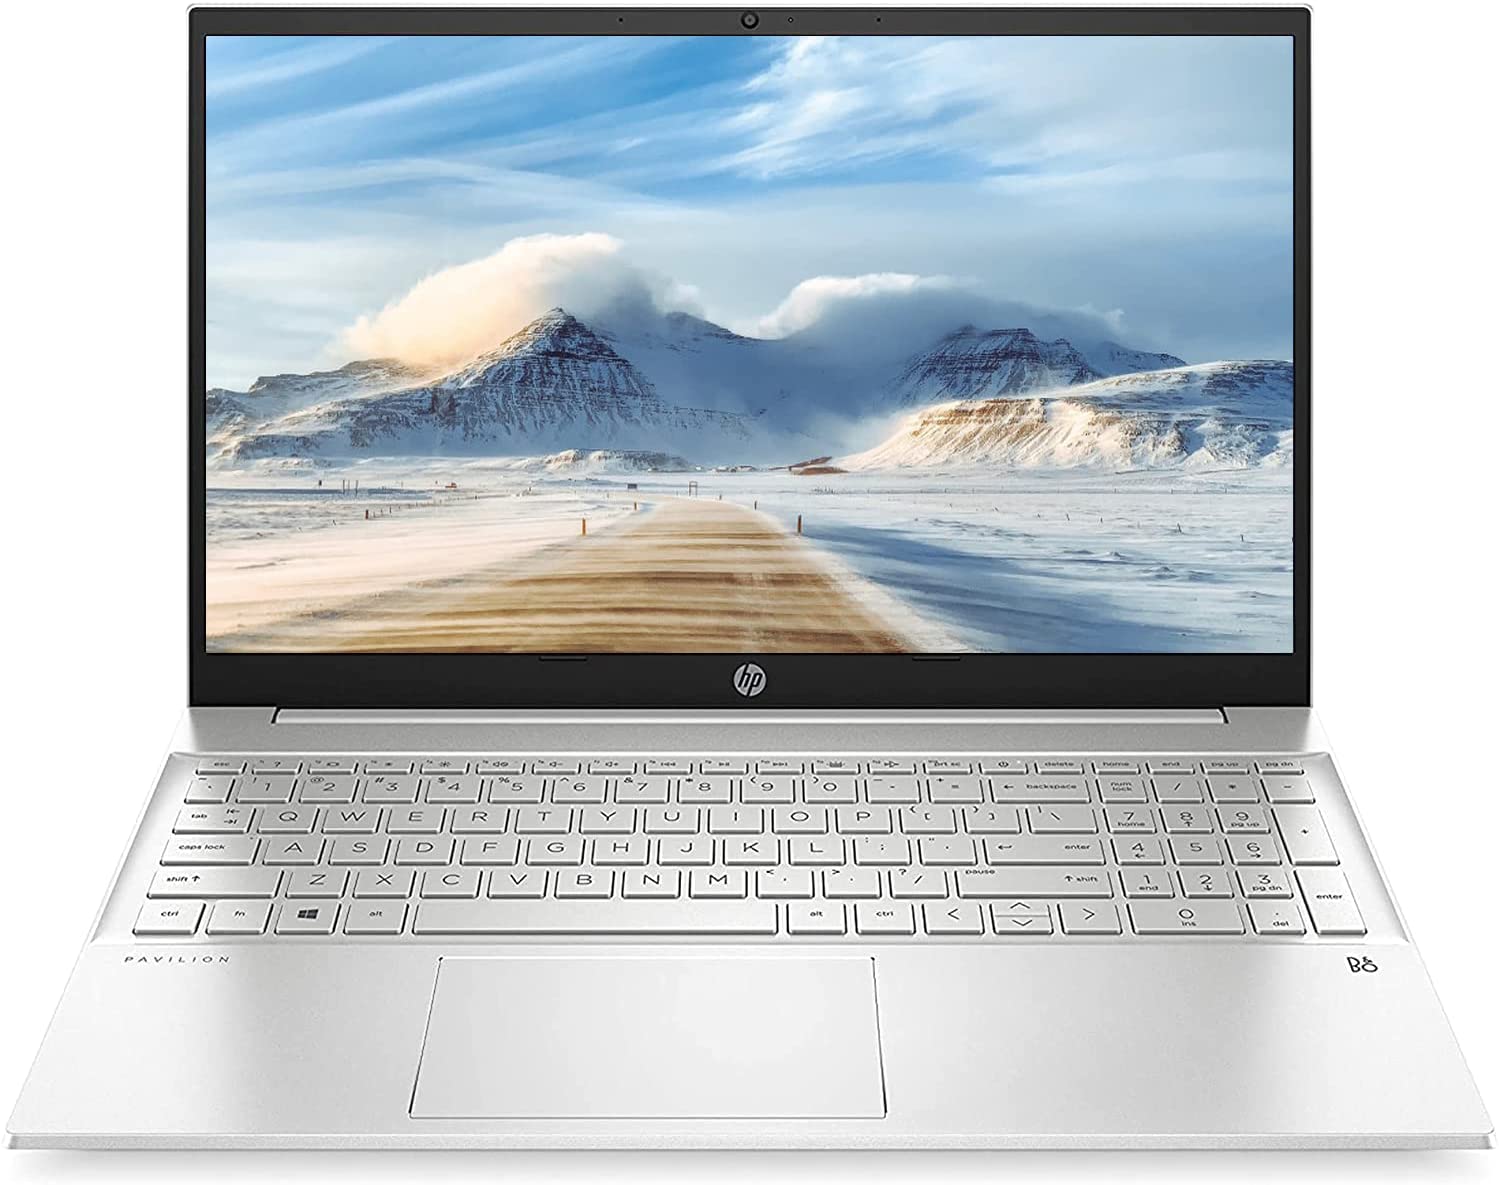 This image shows the HP Pavilion 15 2022.